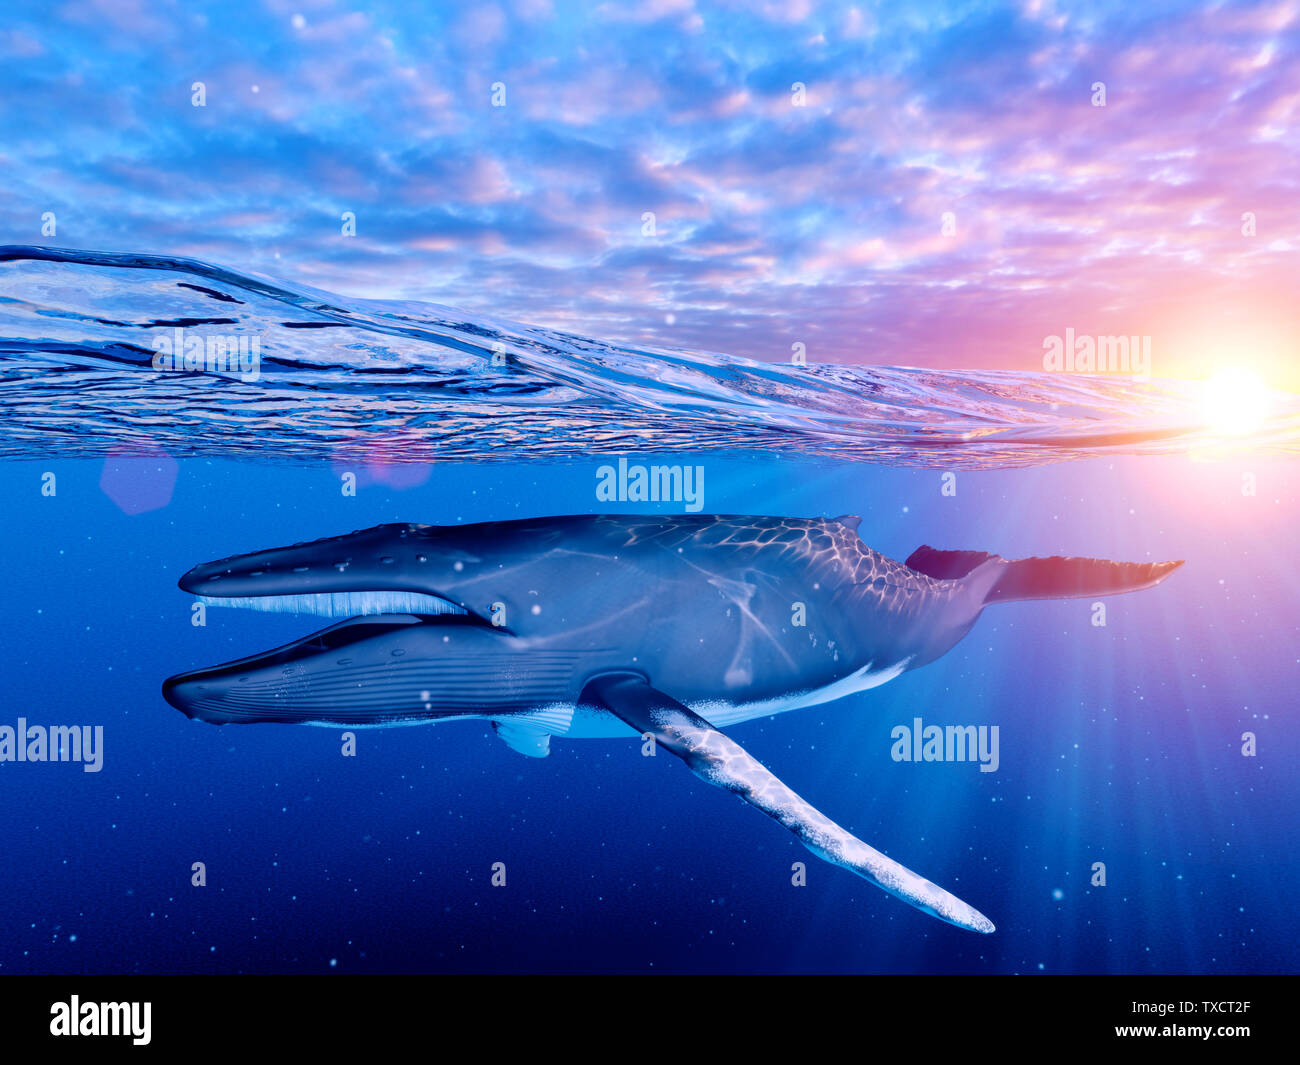 3d rendered illustration of a humpback whale Stock Photo